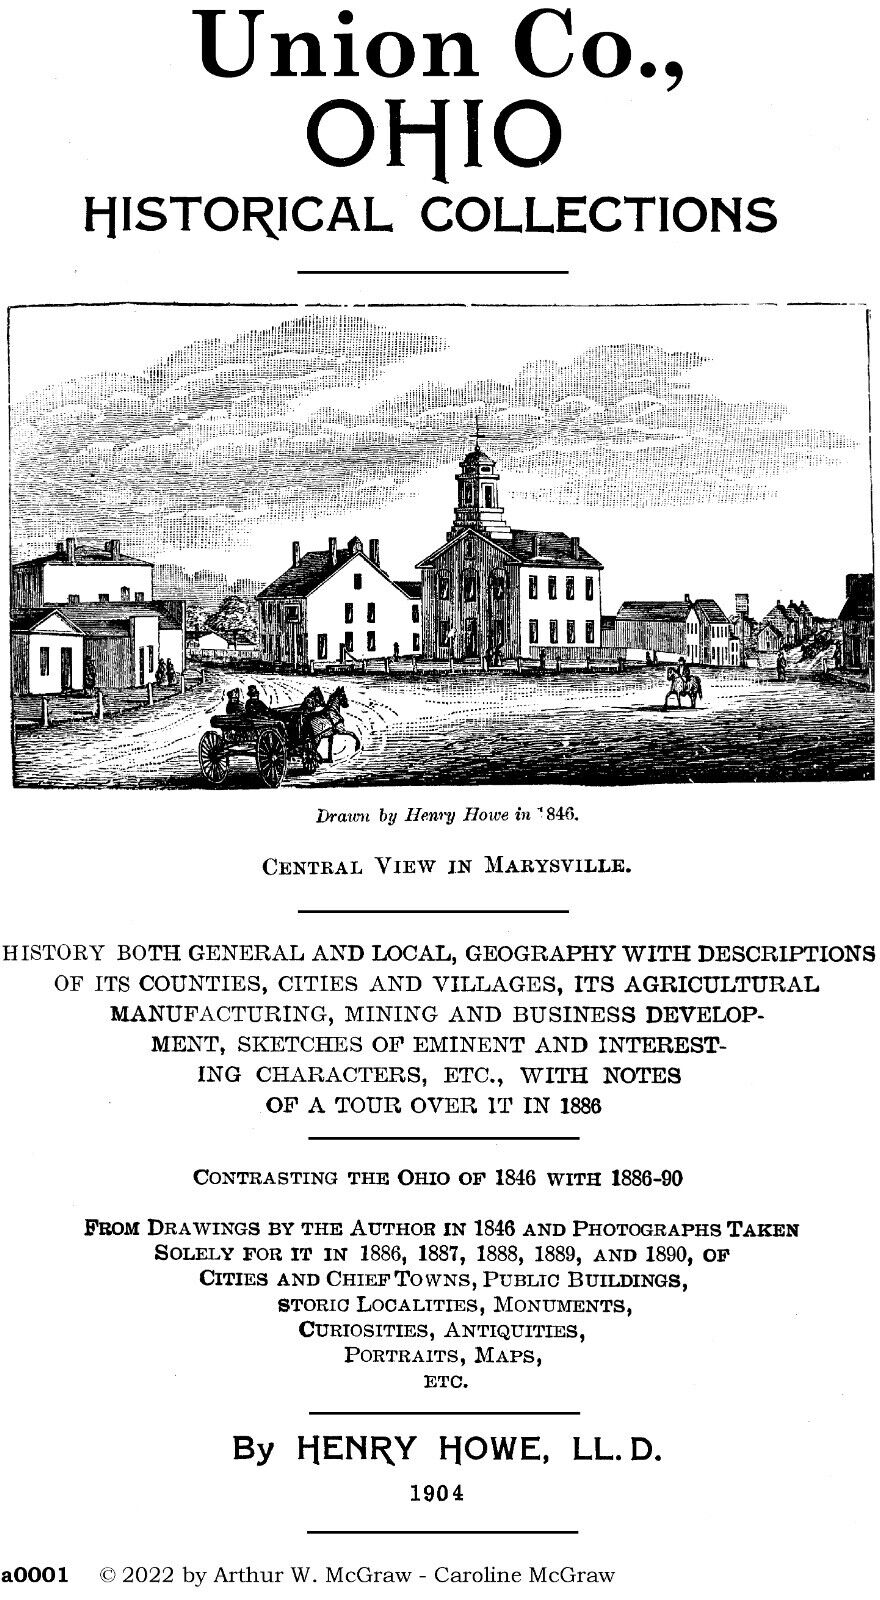 Union Co., Ohio Historical Collections 1904 by Henry Howe - pdf